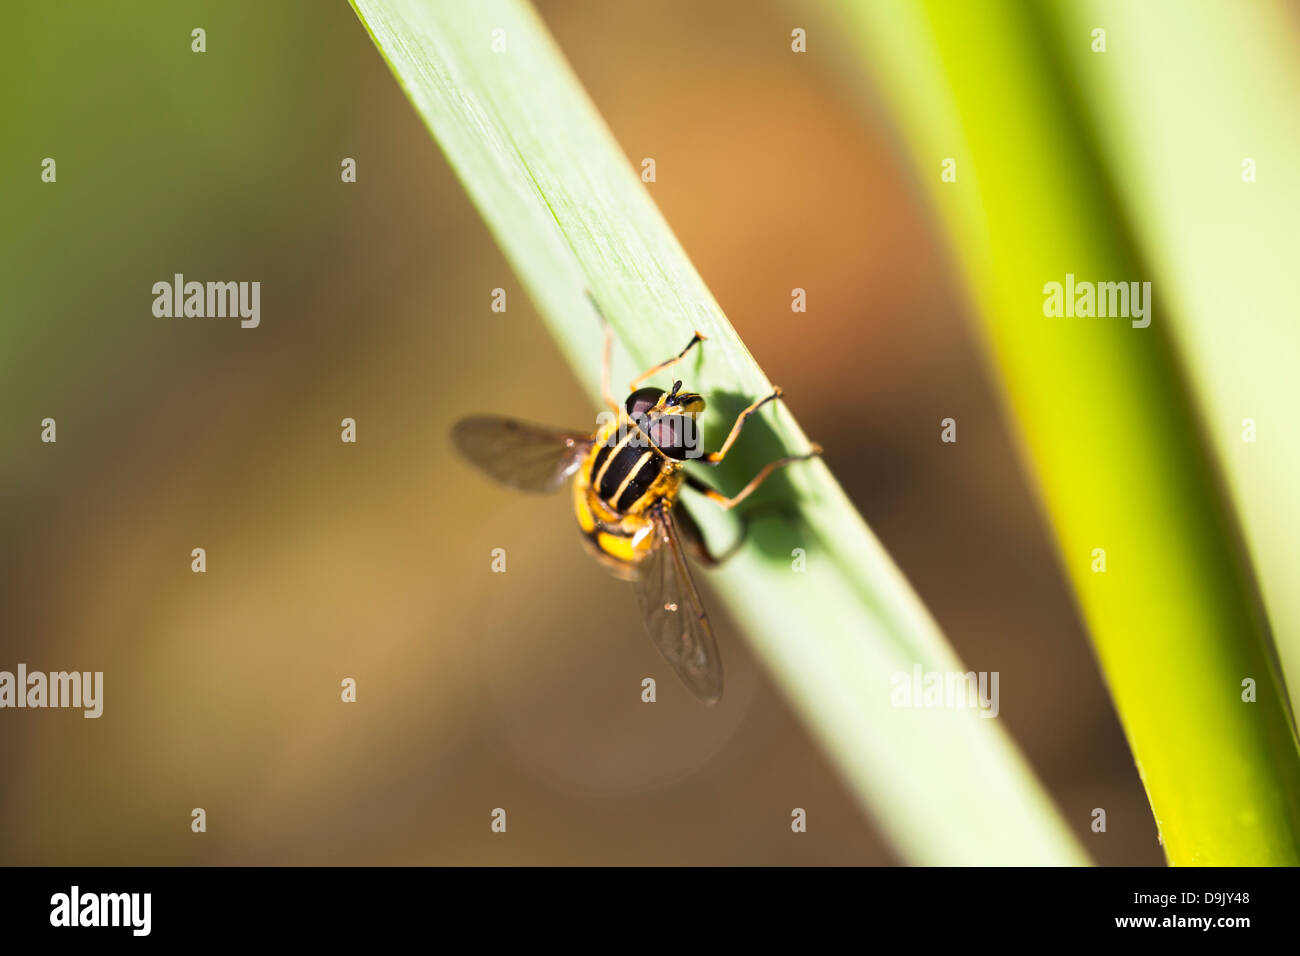 Close up of a hoverfly (Syrphidae) wasp mimic with large compound eyes landed on a green reed Stock Photo